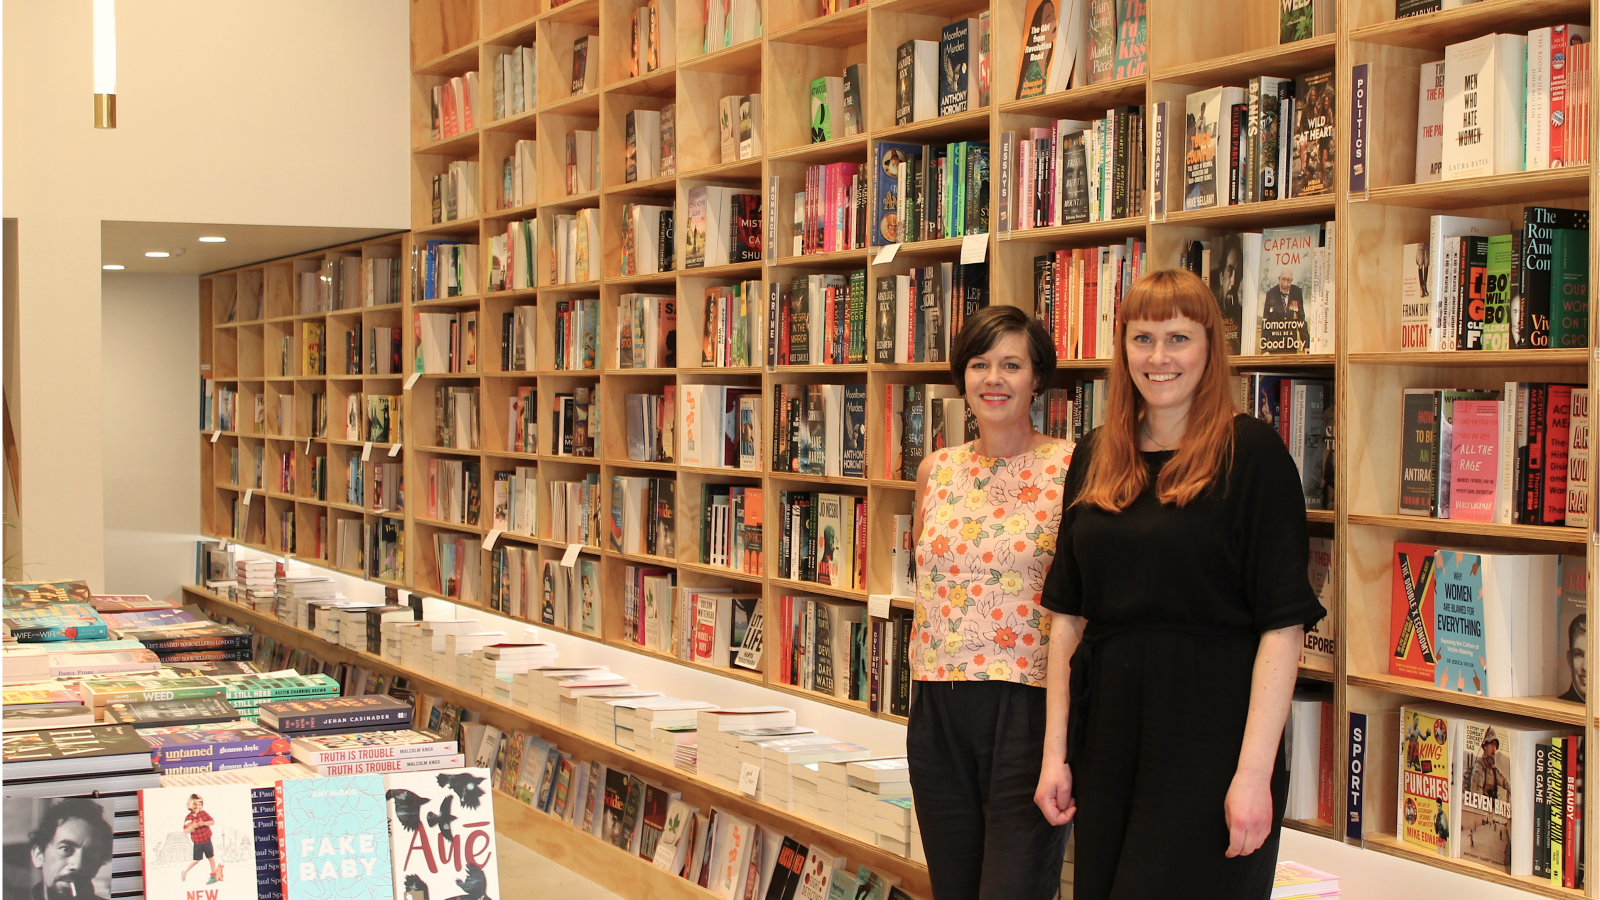 Two woman, one with long red hair, one with a brown bob, standing in front of a bookshelf